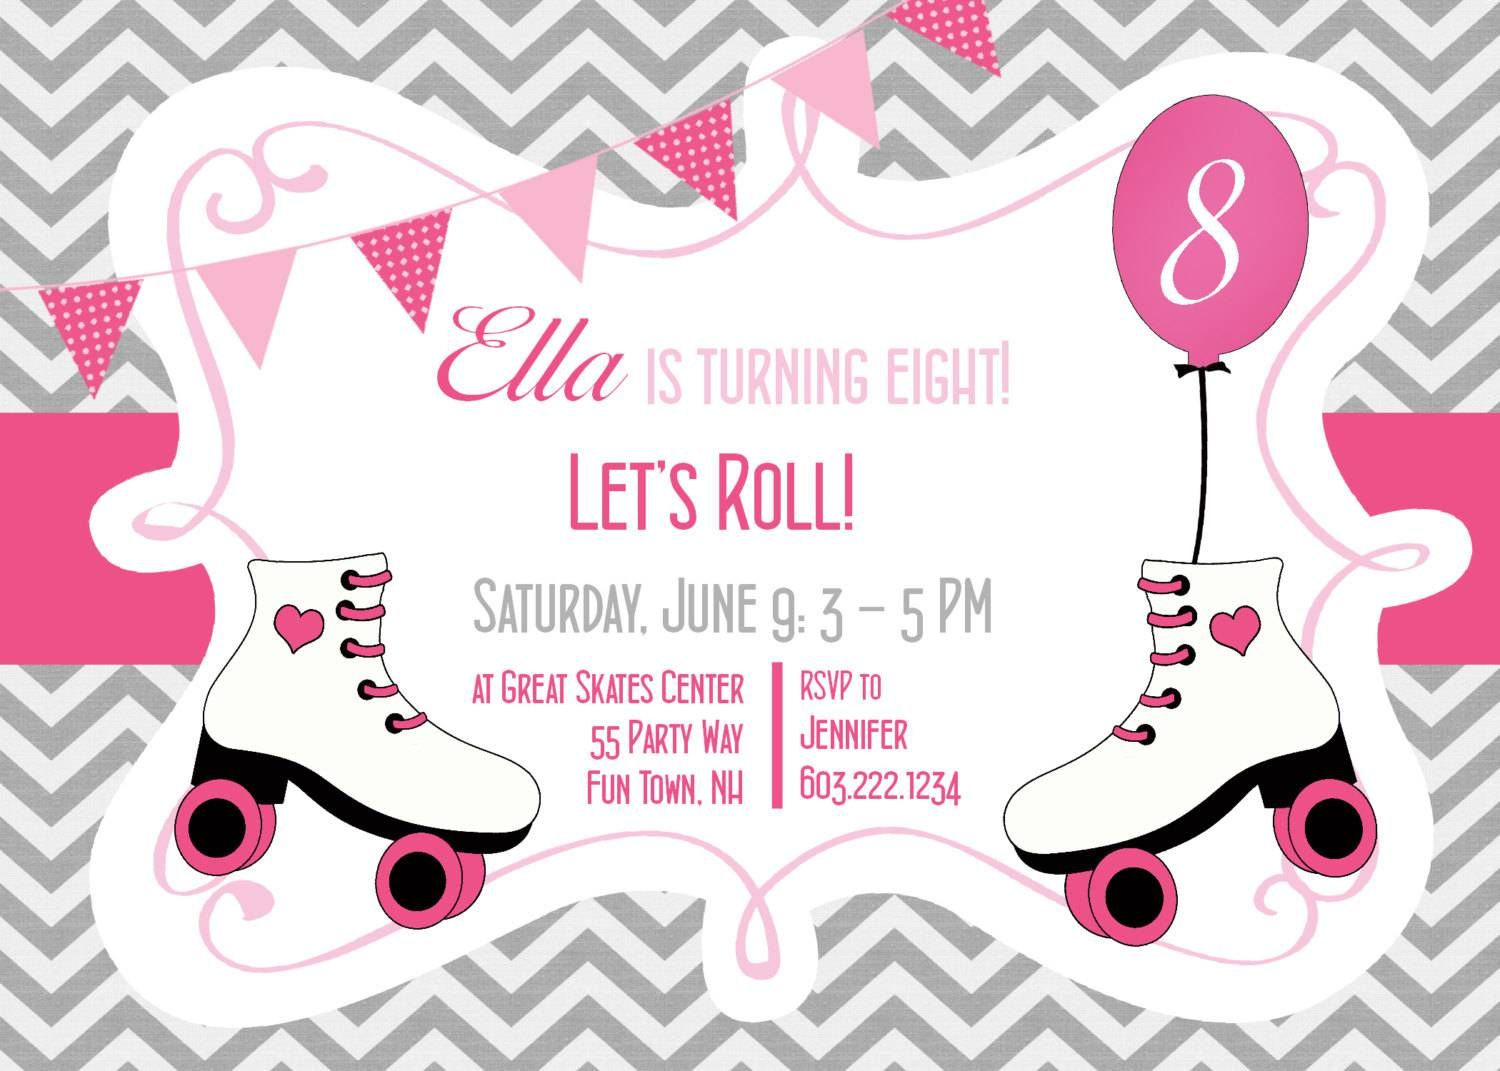 Ice Skating Party Invitations Free Printable | Kids Birthdays In - Free Printable Skateboard Birthday Party Invitations